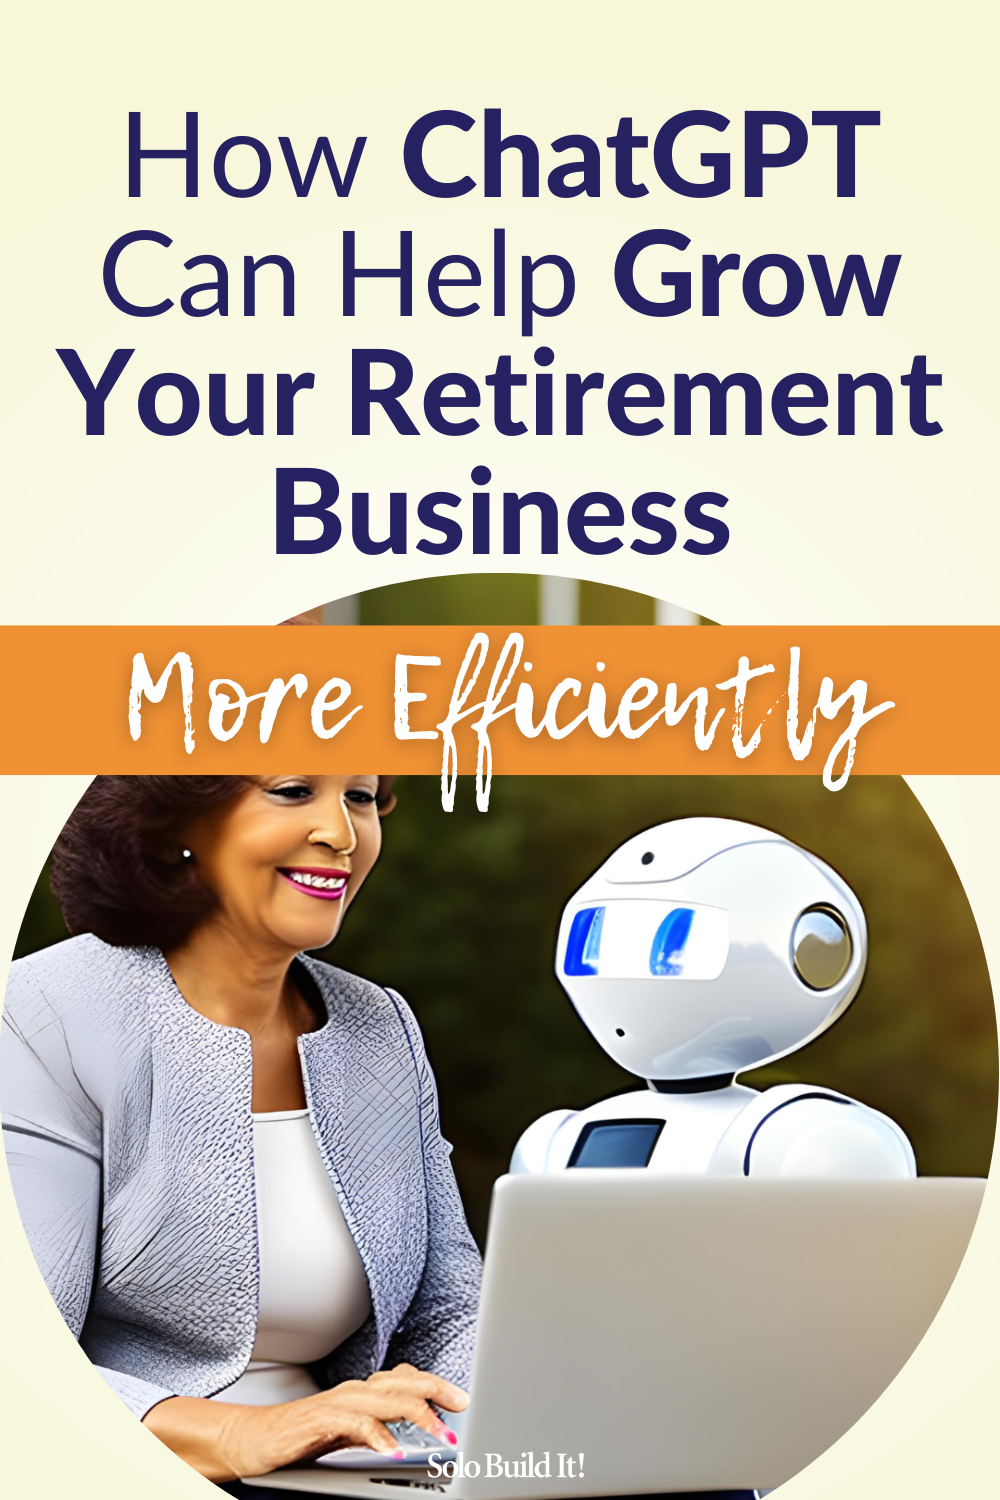 How to Grow a Retirement Business Using ChatGPT